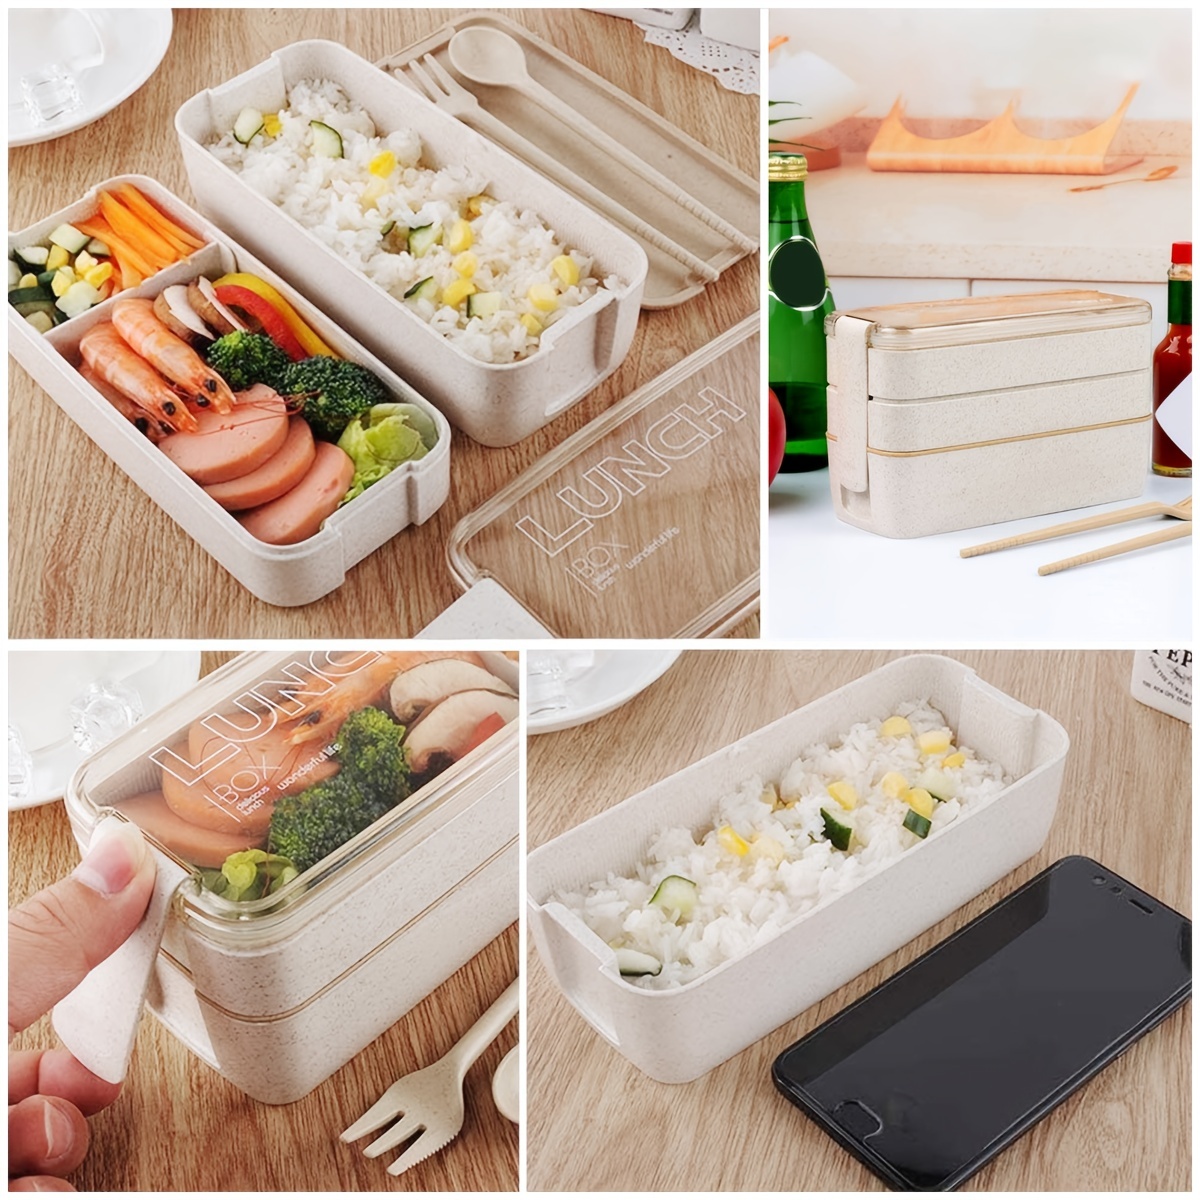 Healthy and Durable 3-Pack Wheat Fiber Bento Box Set with Utensils